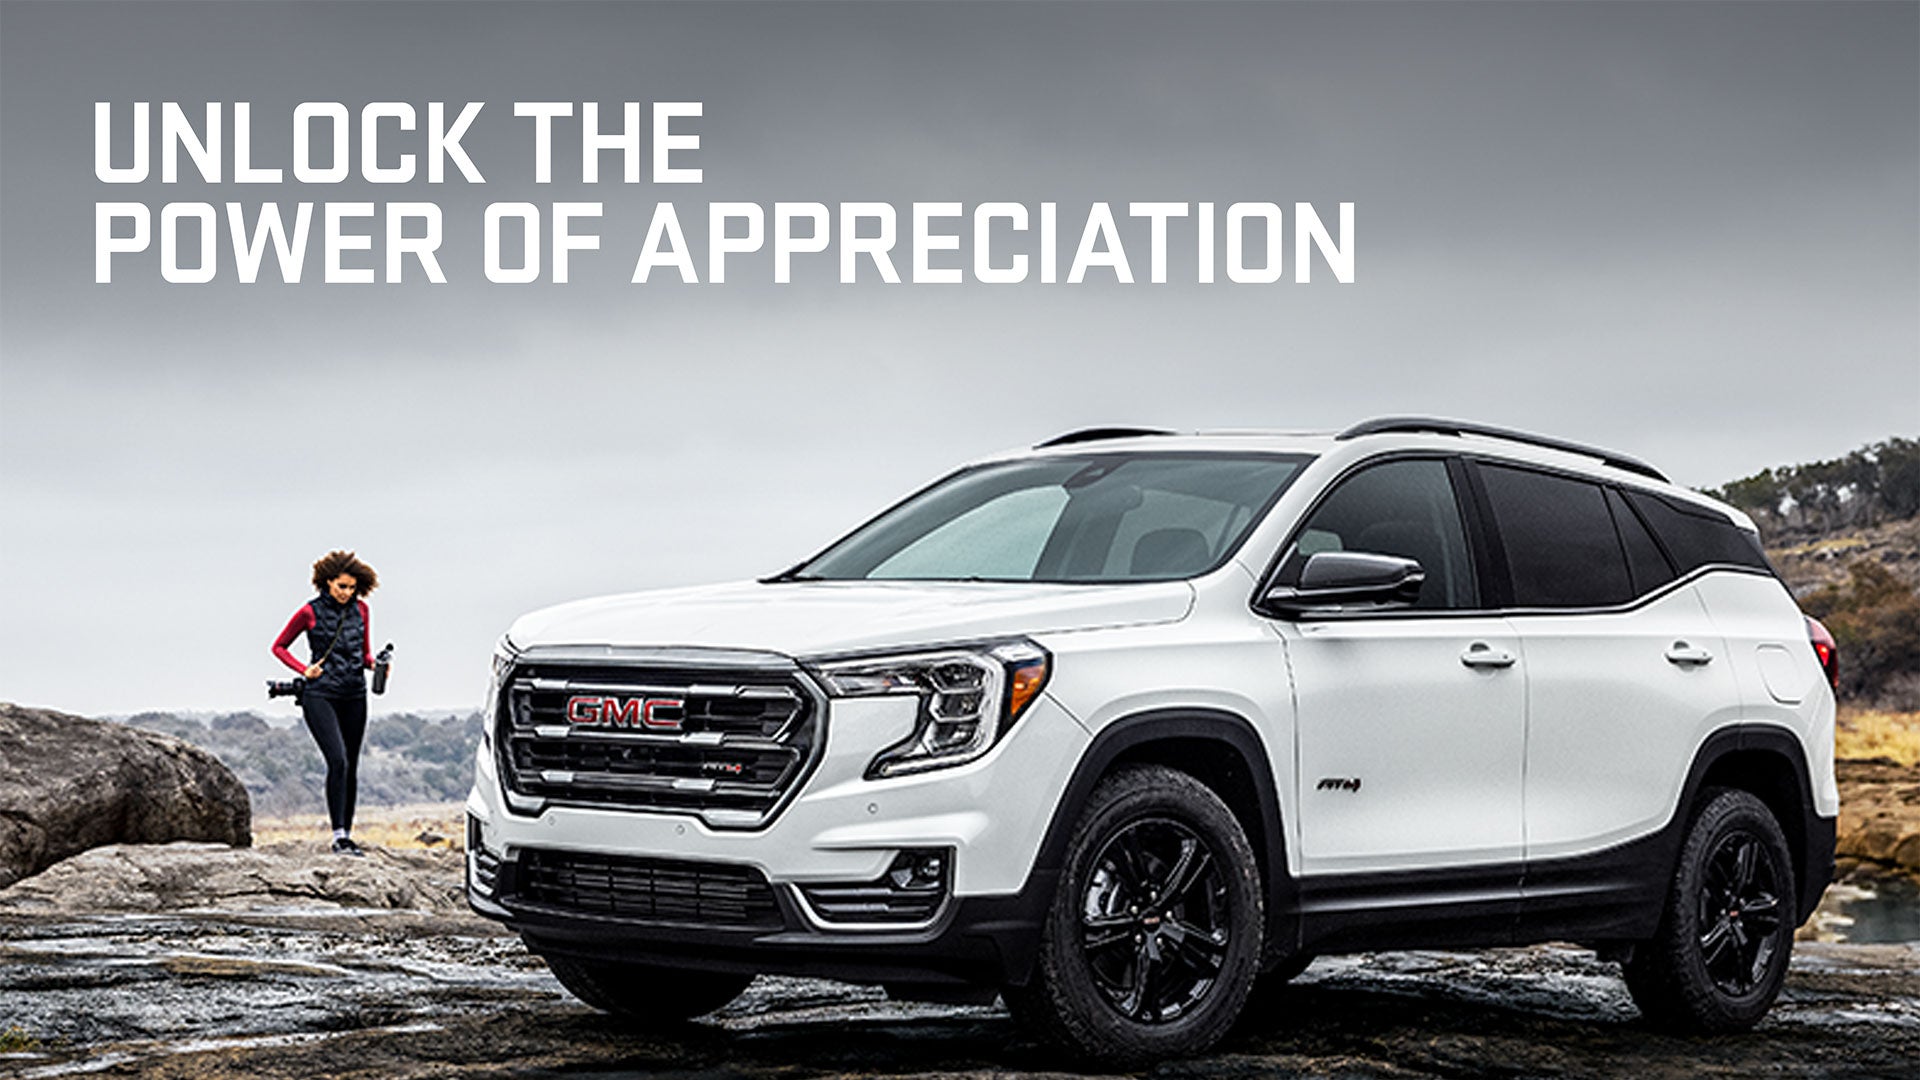 Unlock the power of appreciation | LaFontaine Buick GMC Highland in Highland Charter Township MI